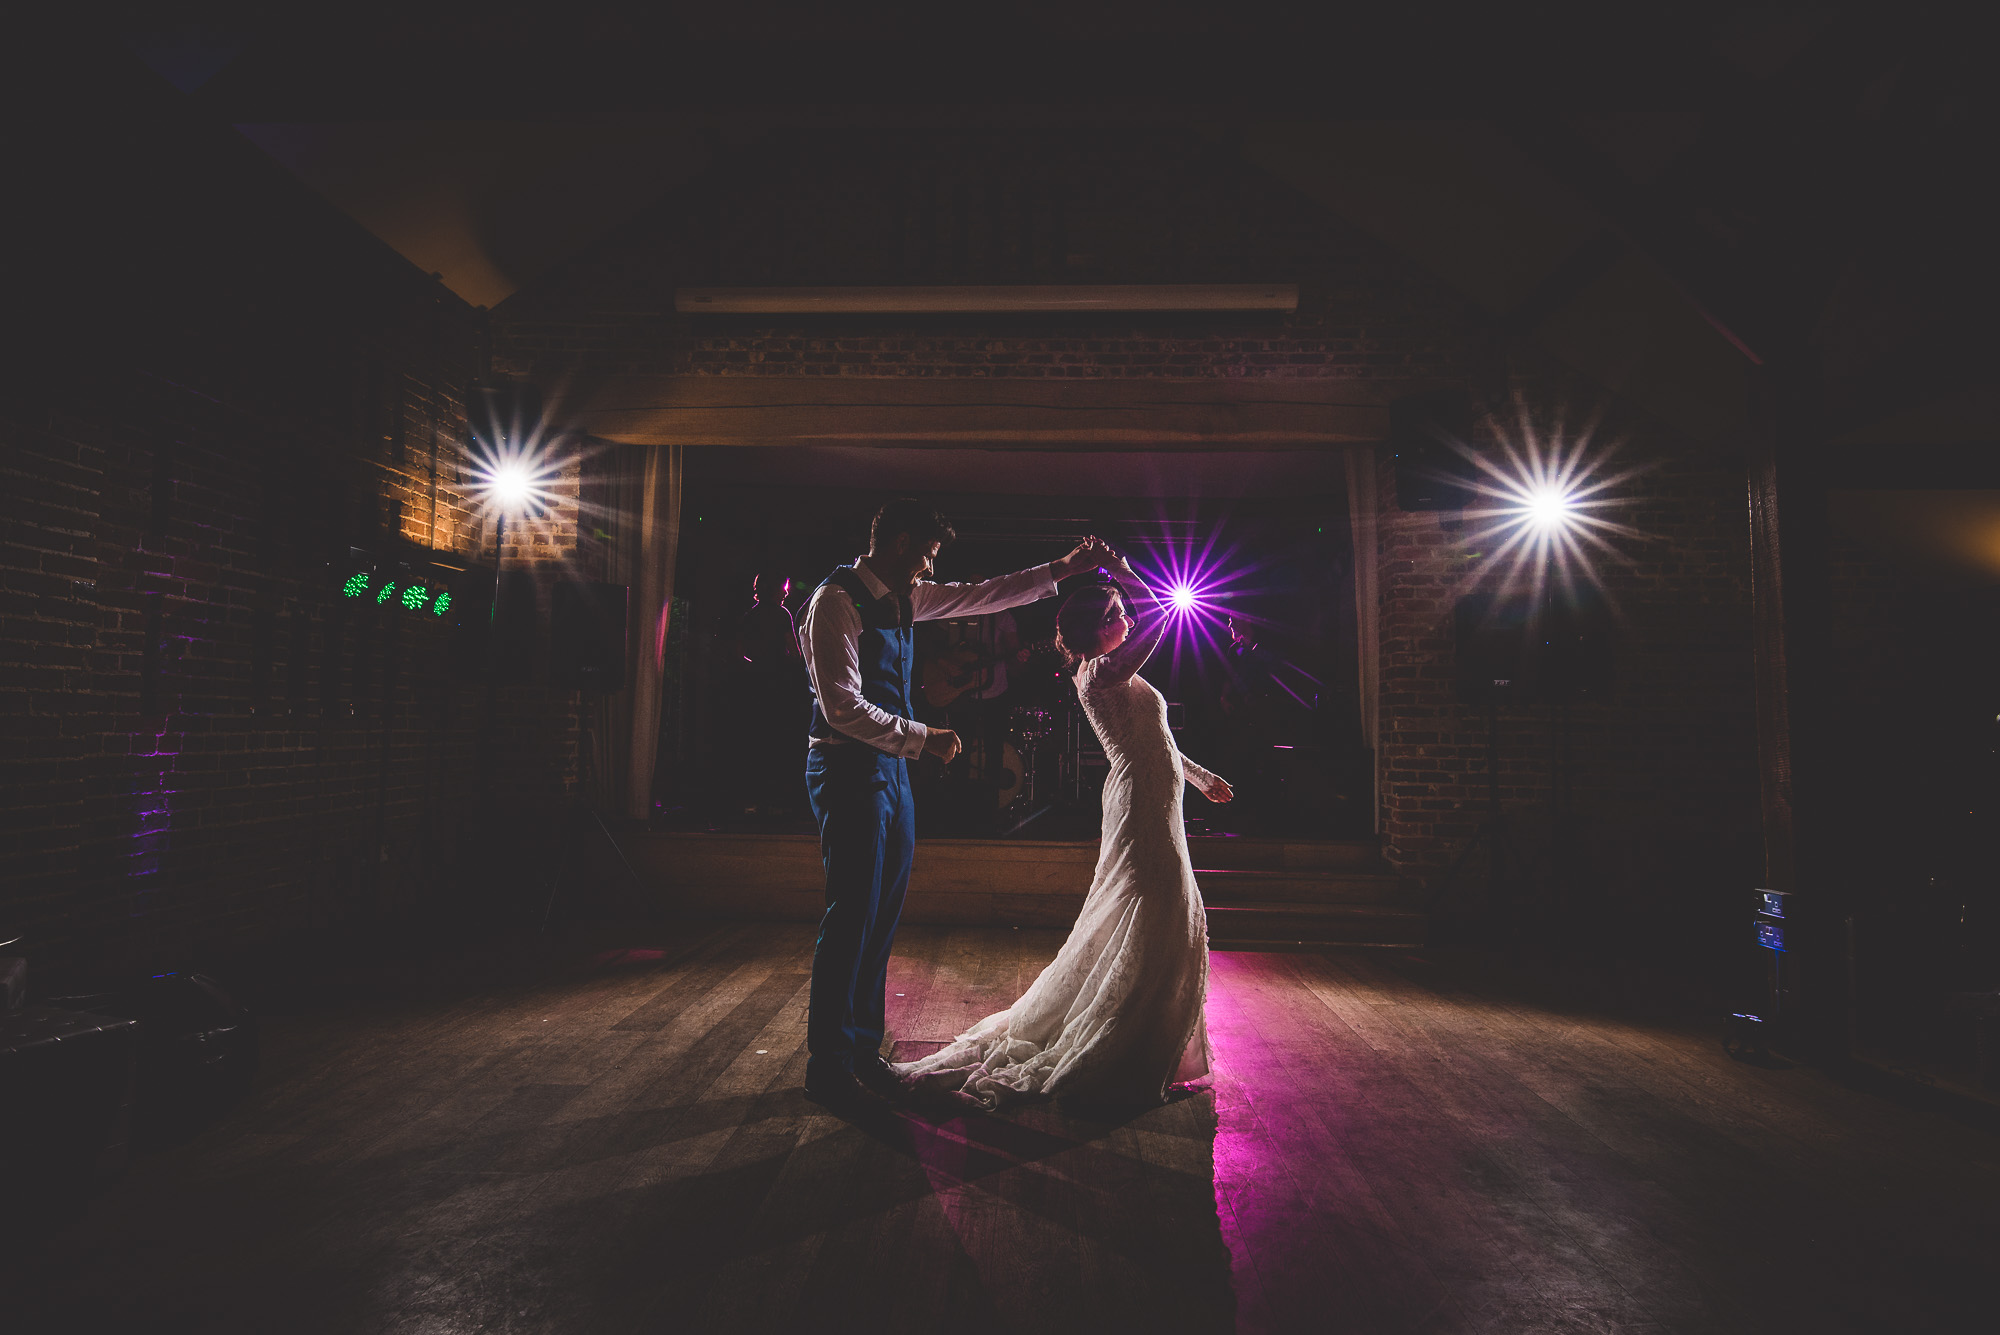 A wedding photographer captures a bride and groom dancing in a dark room.